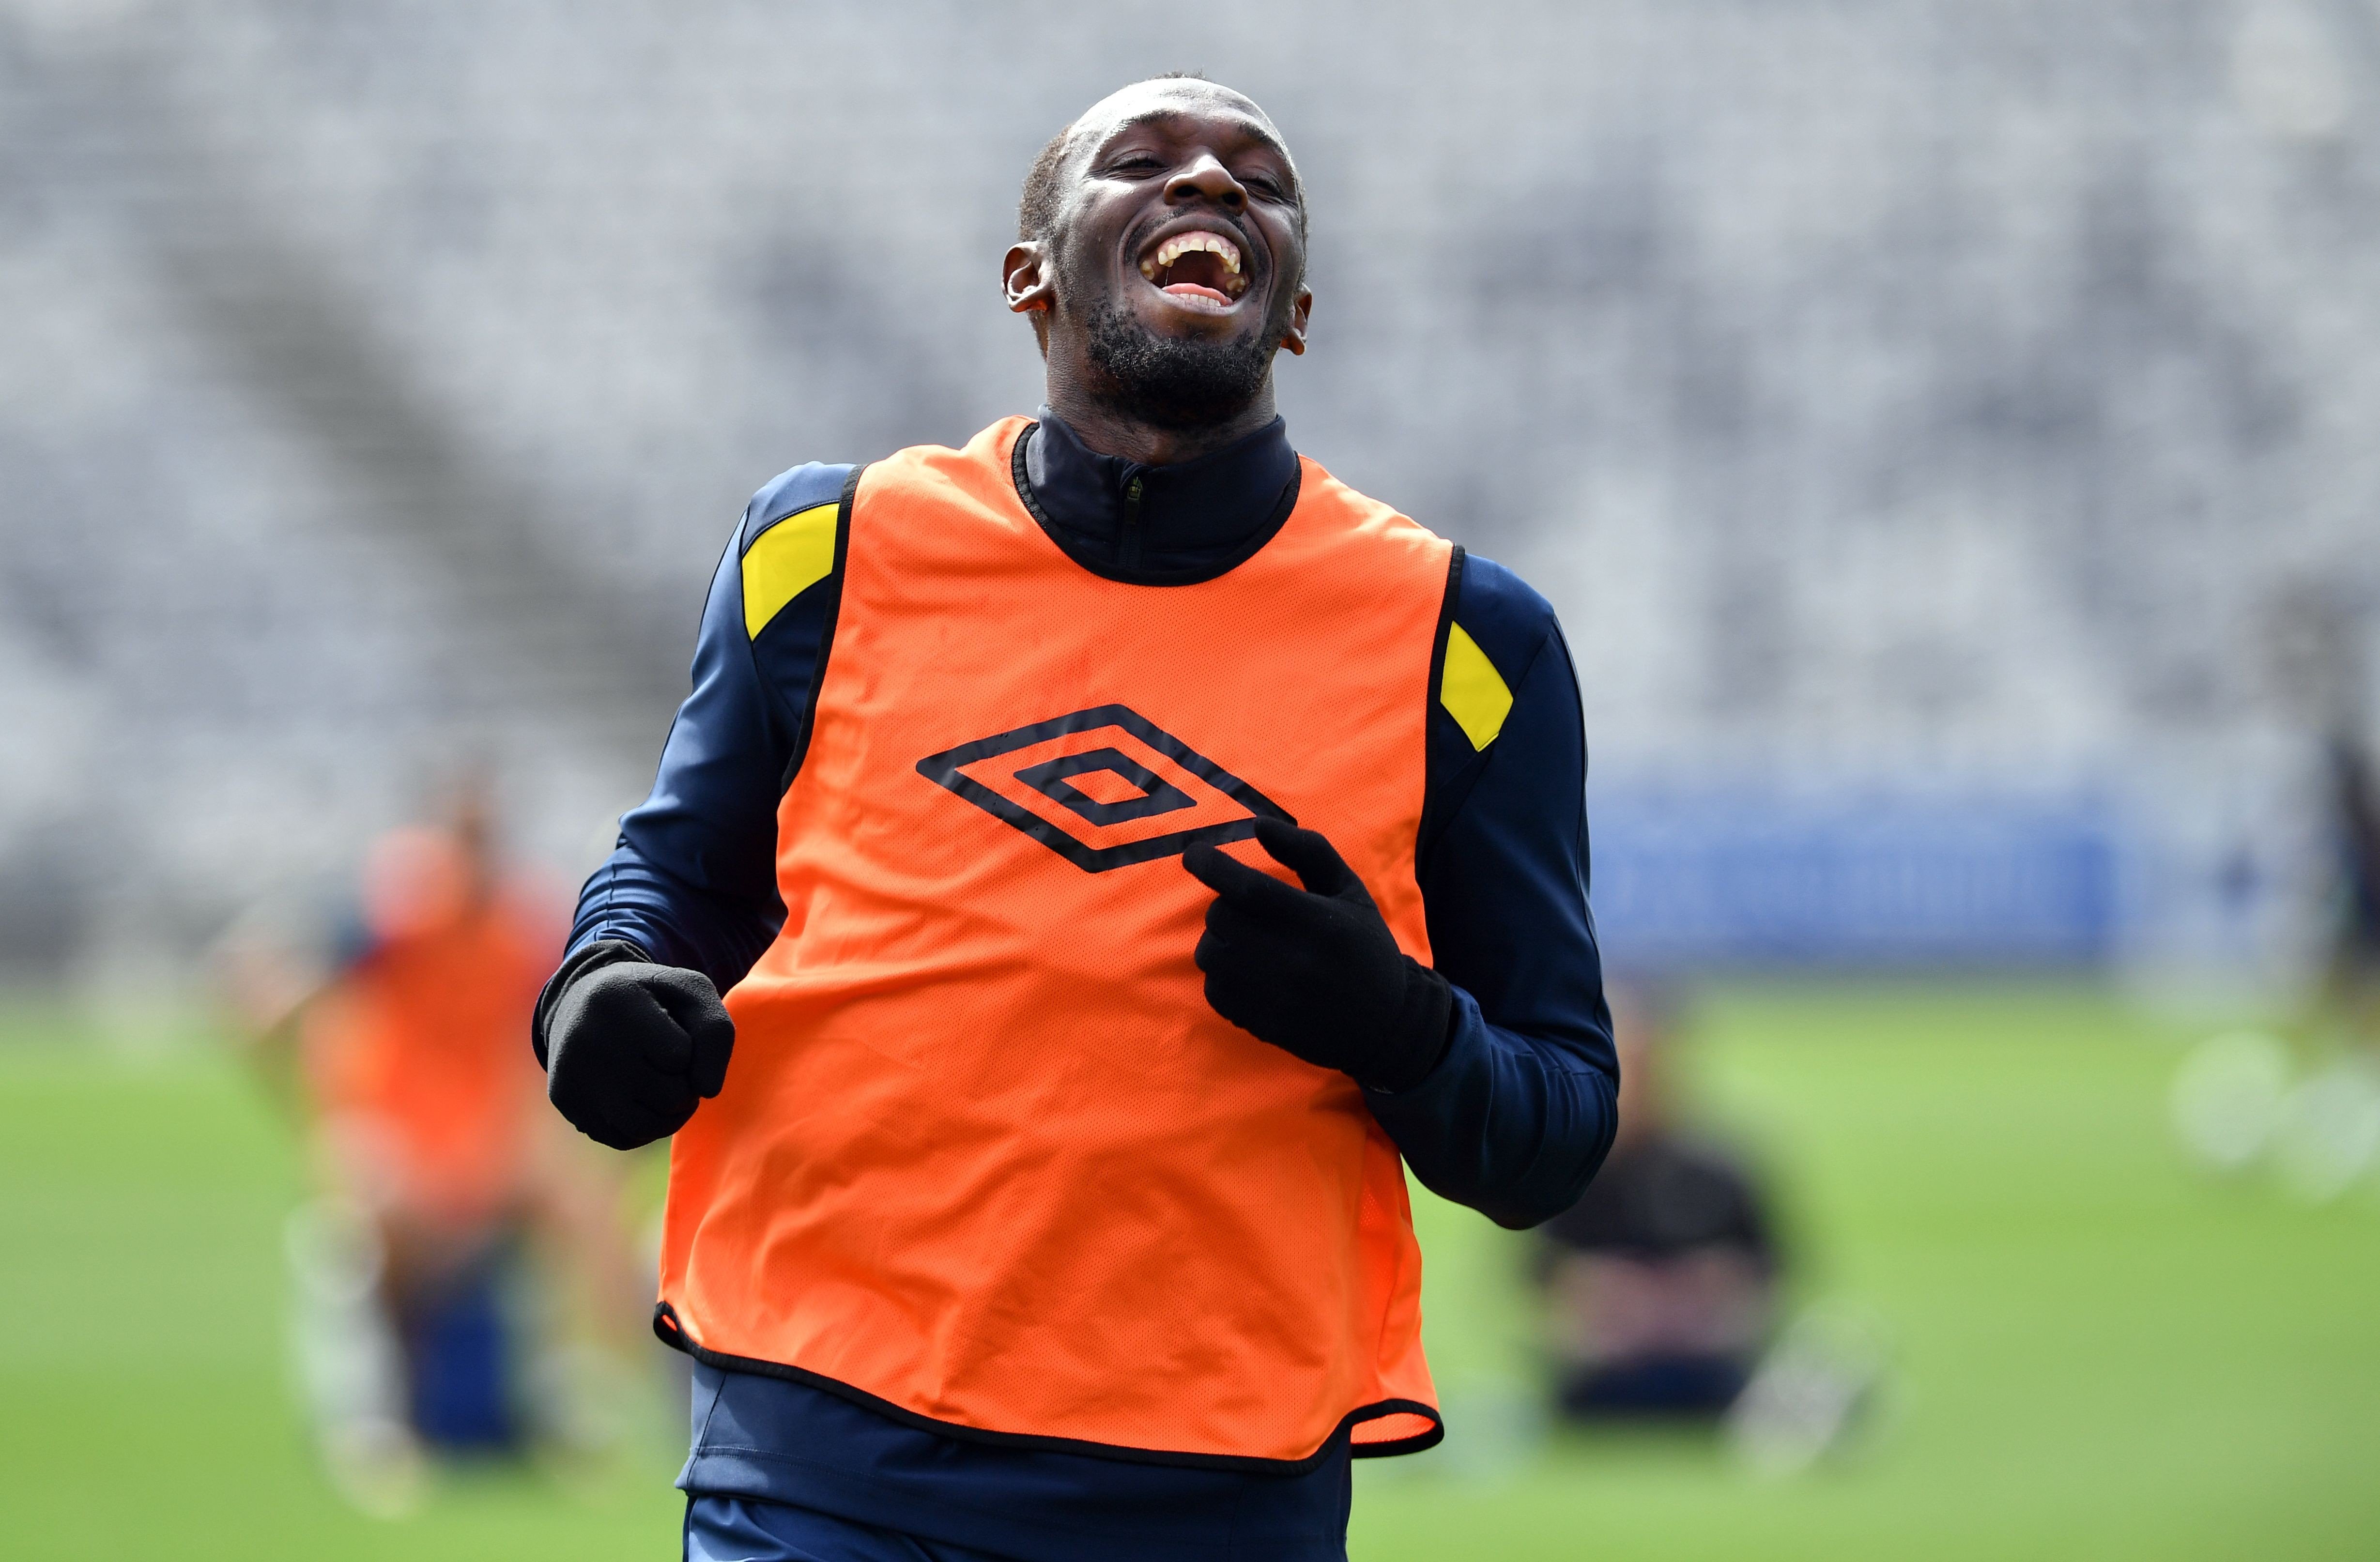 Olympic champion Usain Bolt trains with A-League football club Central Coast Mariners in Gosford. Photo: AFP